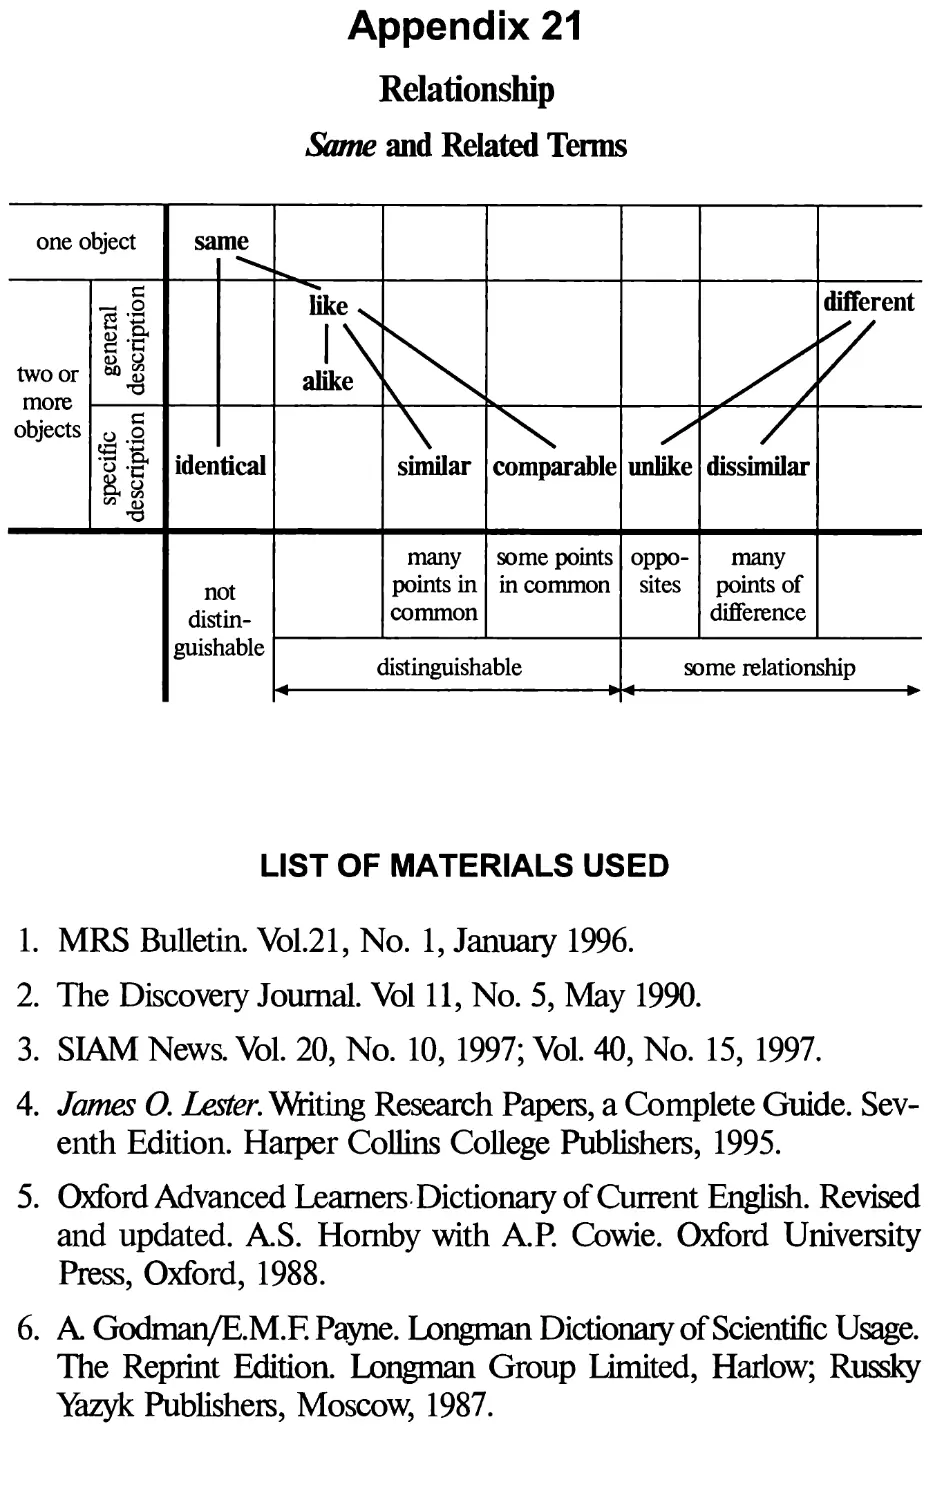 Appendix 21. Relationship
List of Materials Used